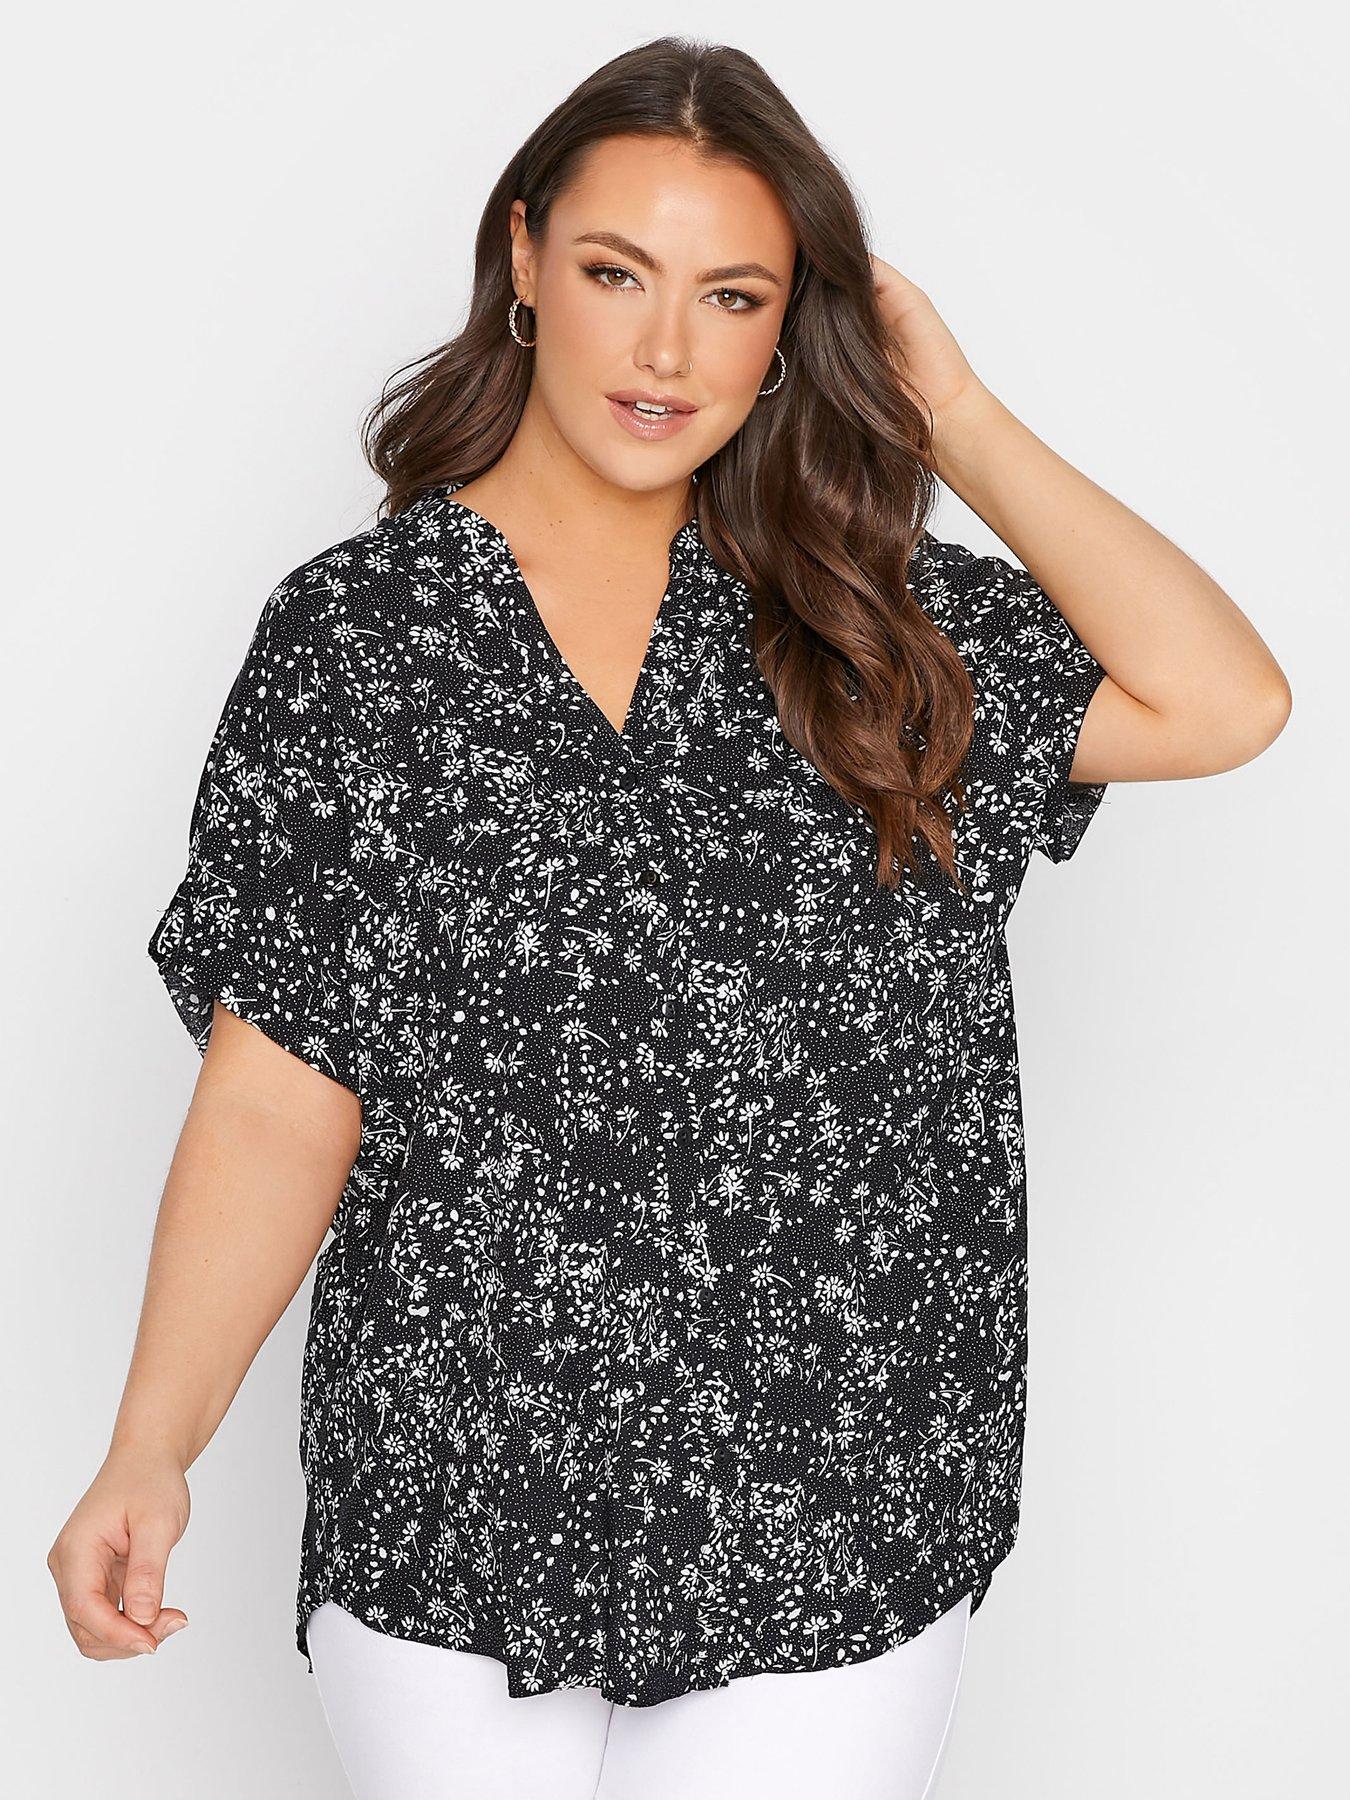 NEW Yours Plus Size 16-32 Black Batwing Sleeve Chiffon Tunic Top Blouse Holiday 